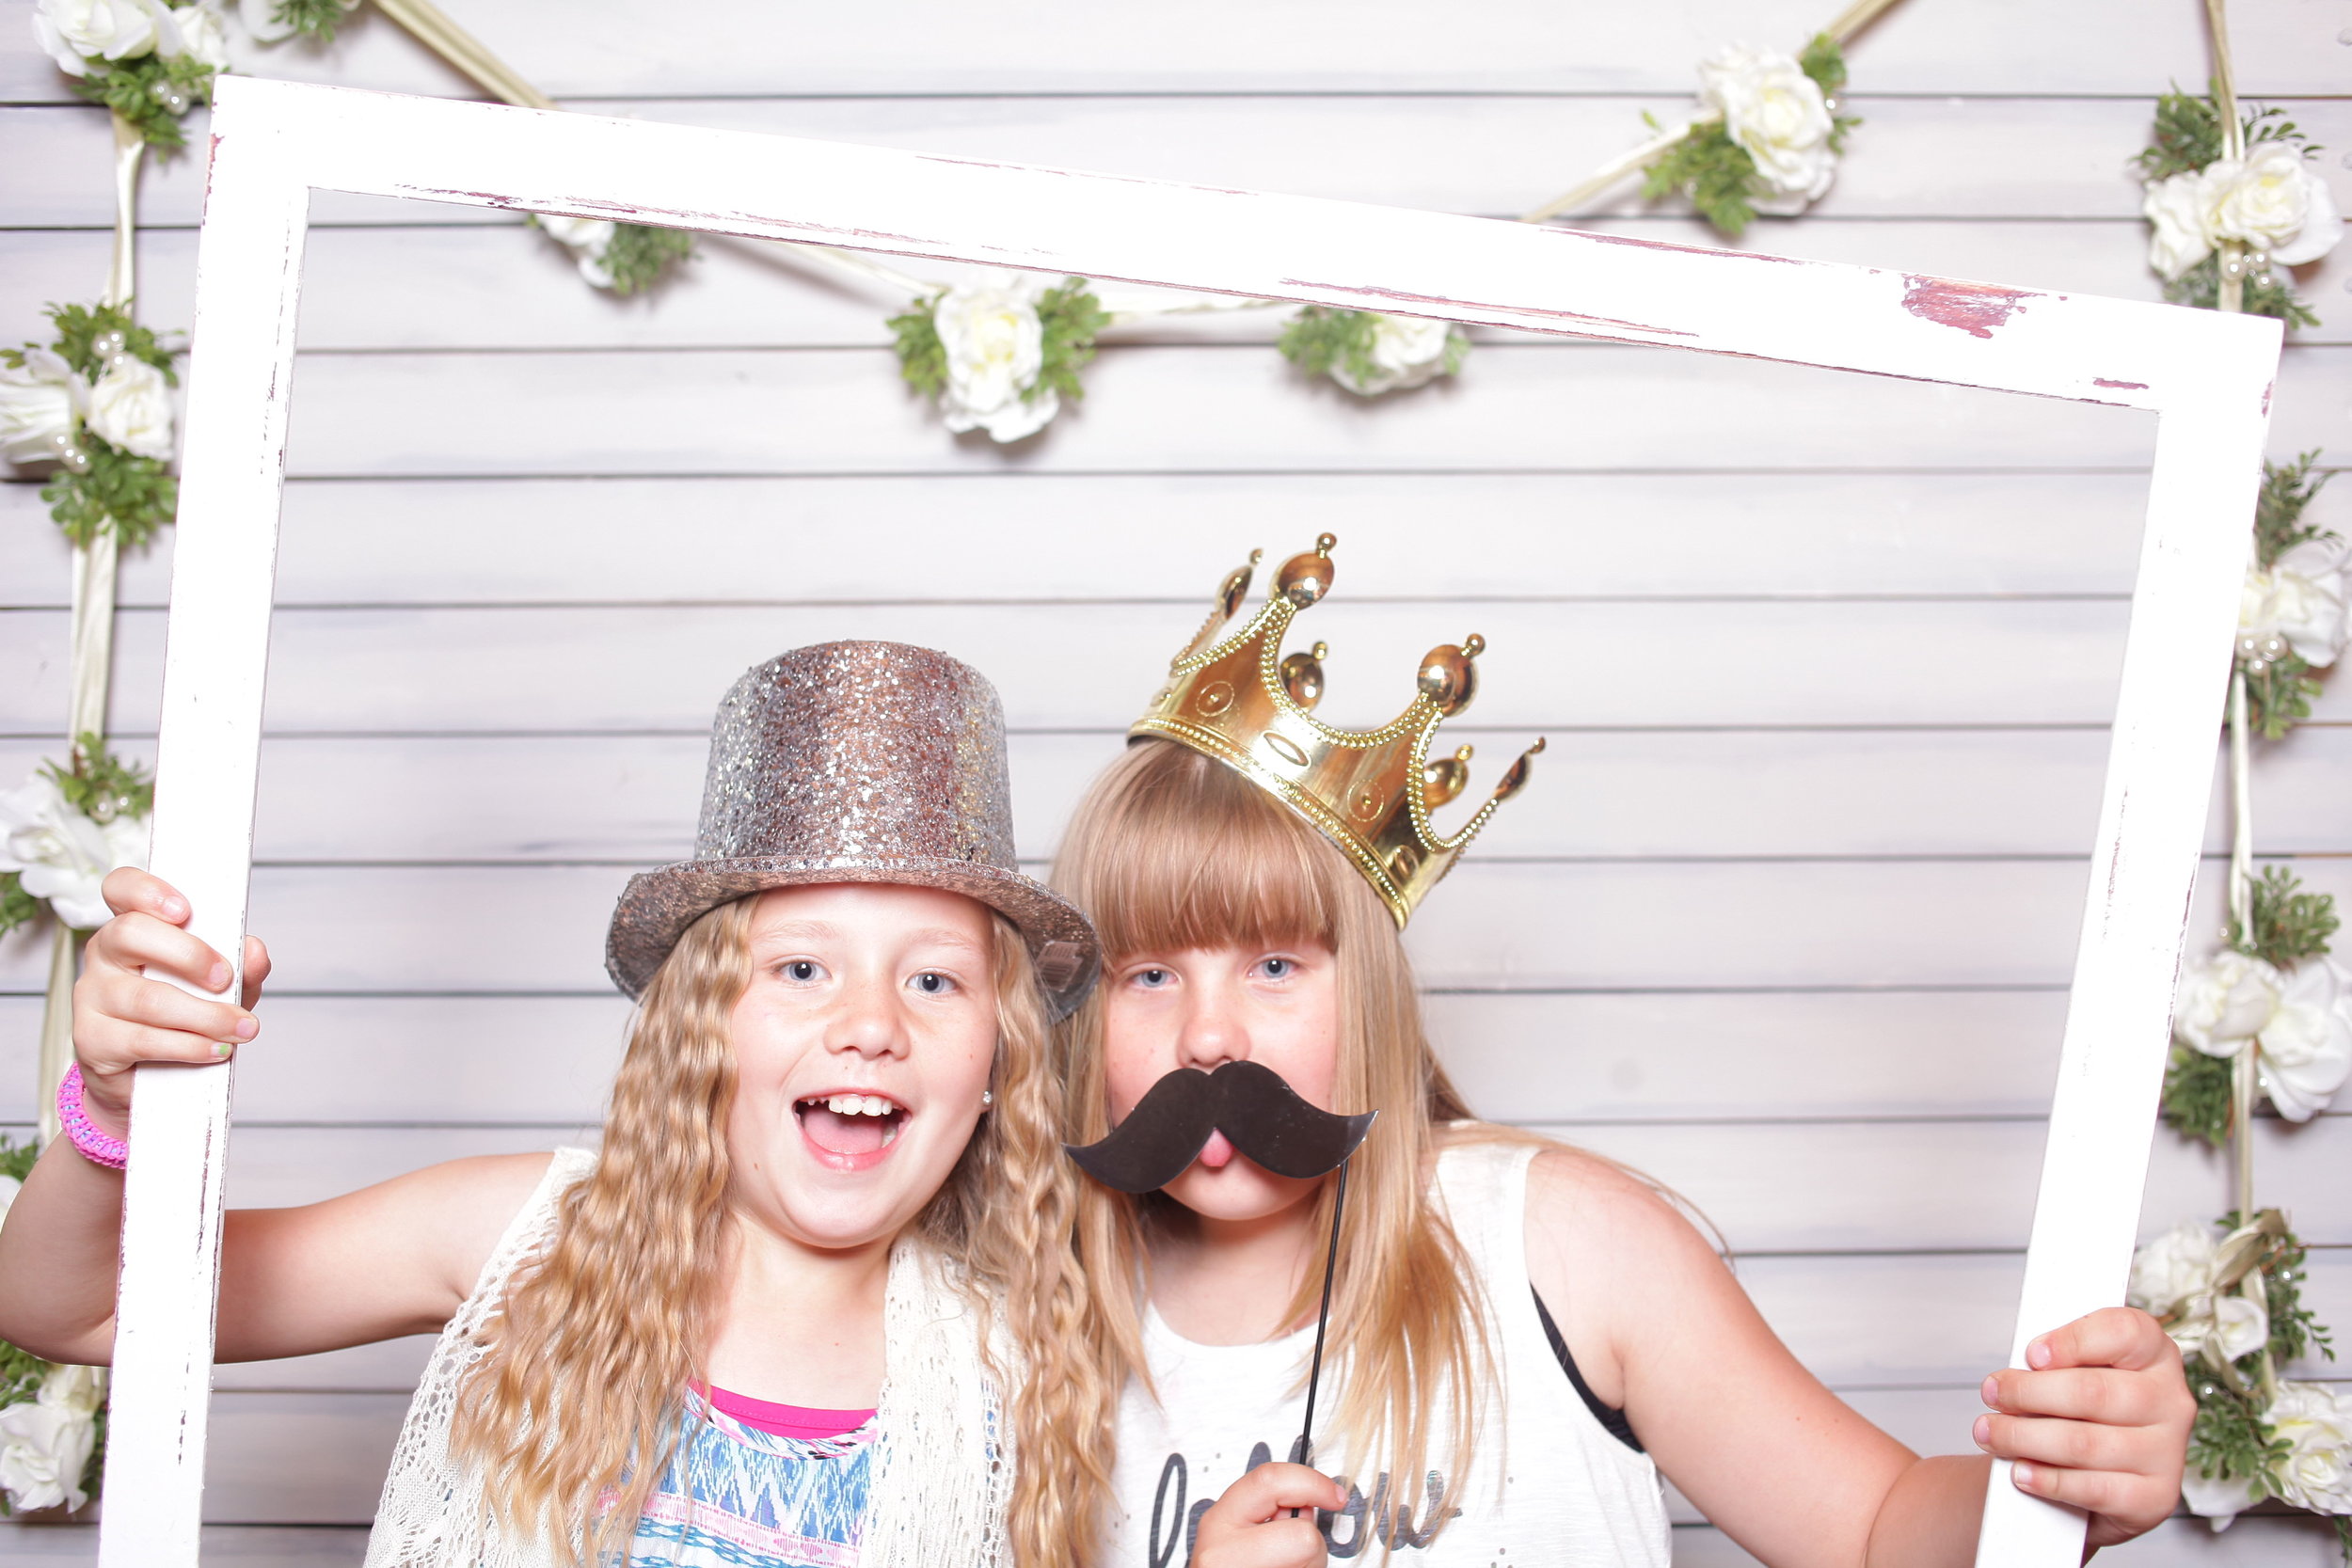 Cheyenne Wyoming Northern Colorado Photobooth for Weddings Events